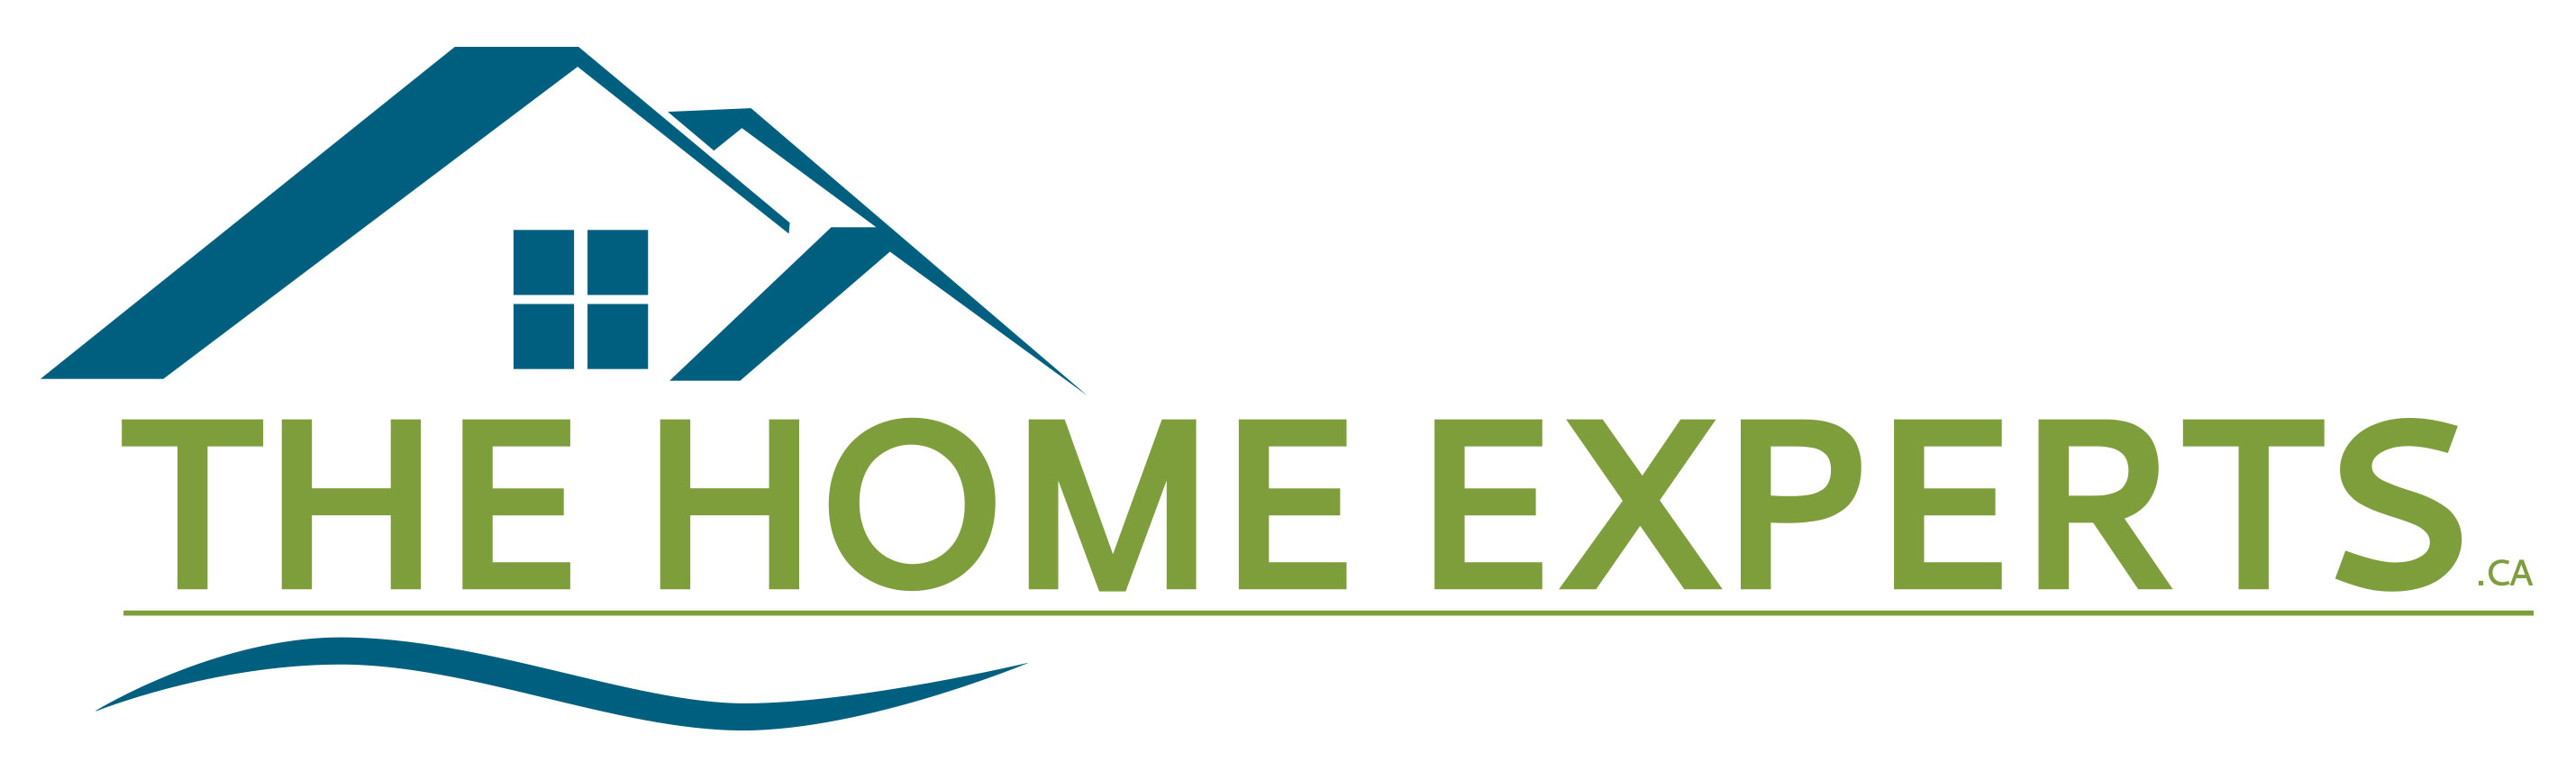 The Home Experts GTA, A Division of Get Global Sales Inc.